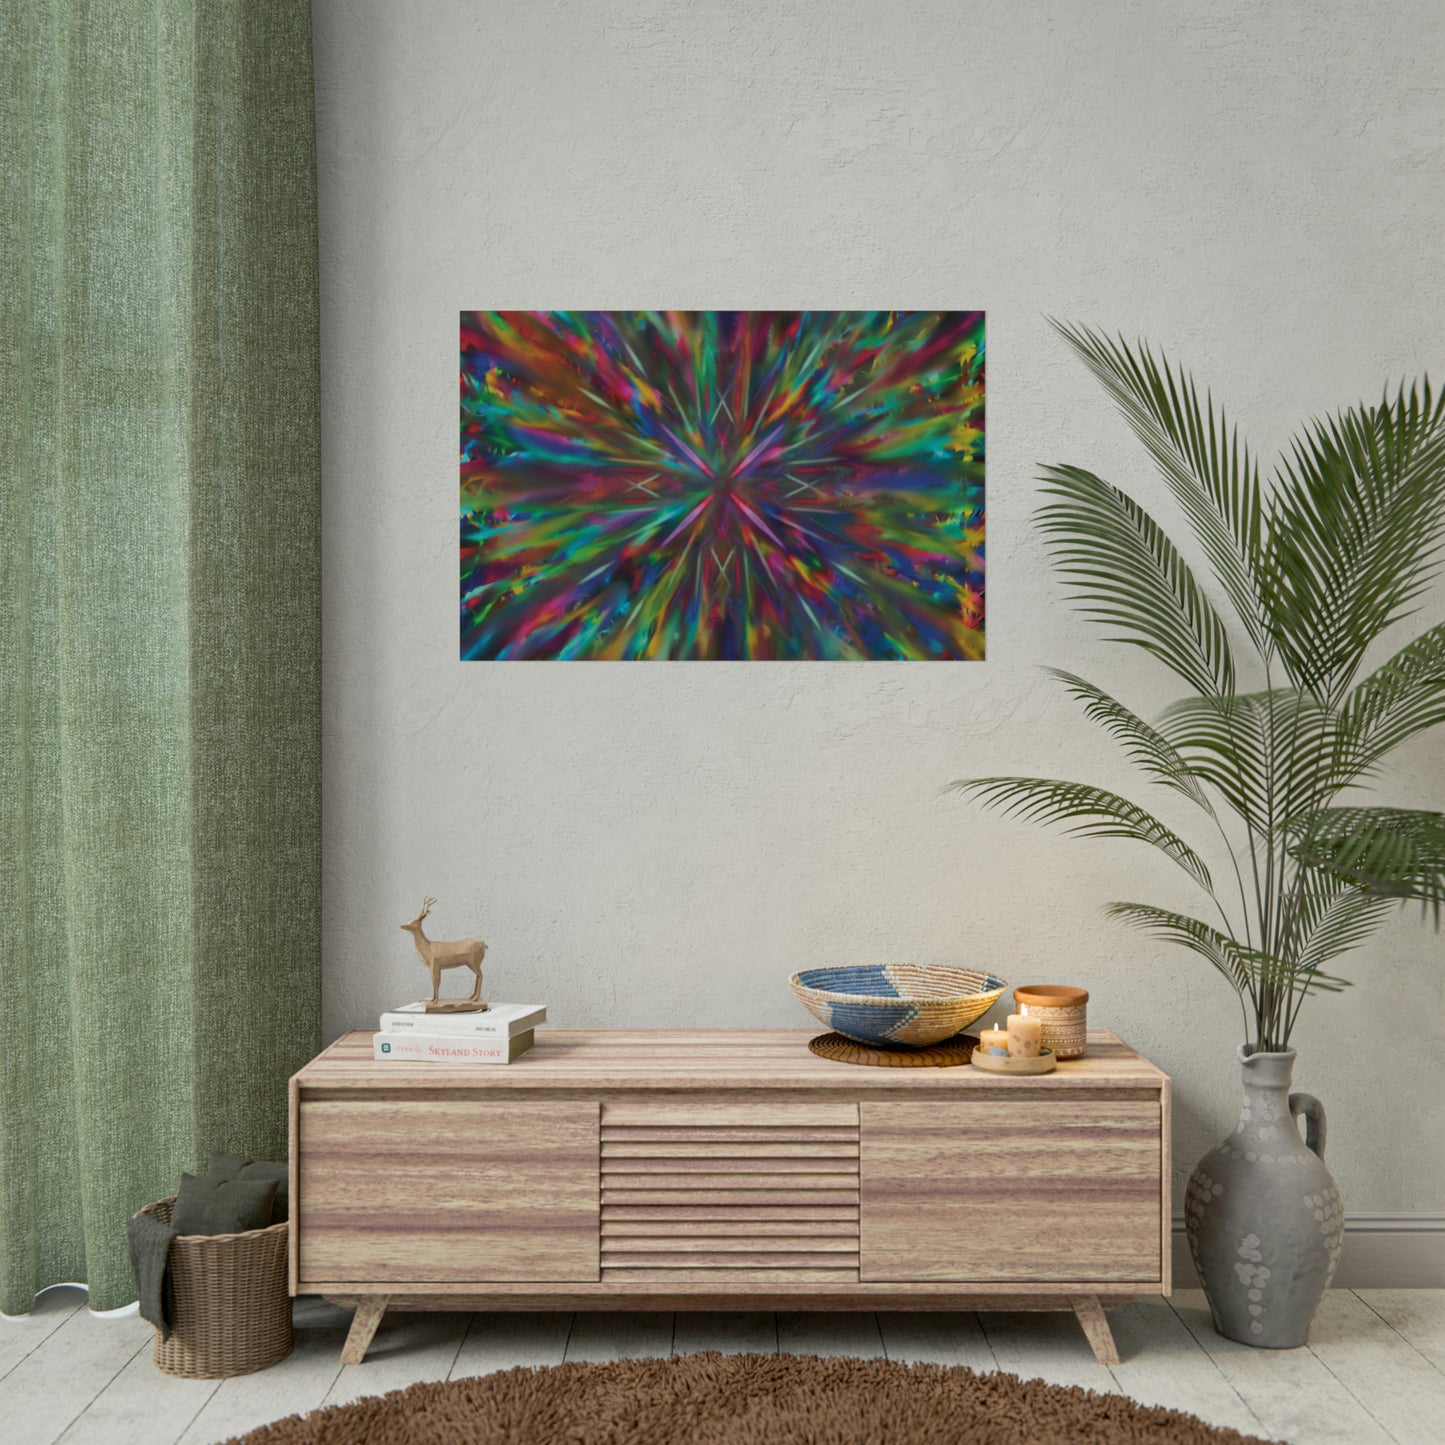 Star Explosion Energy Painting - Poster - Bright Colors